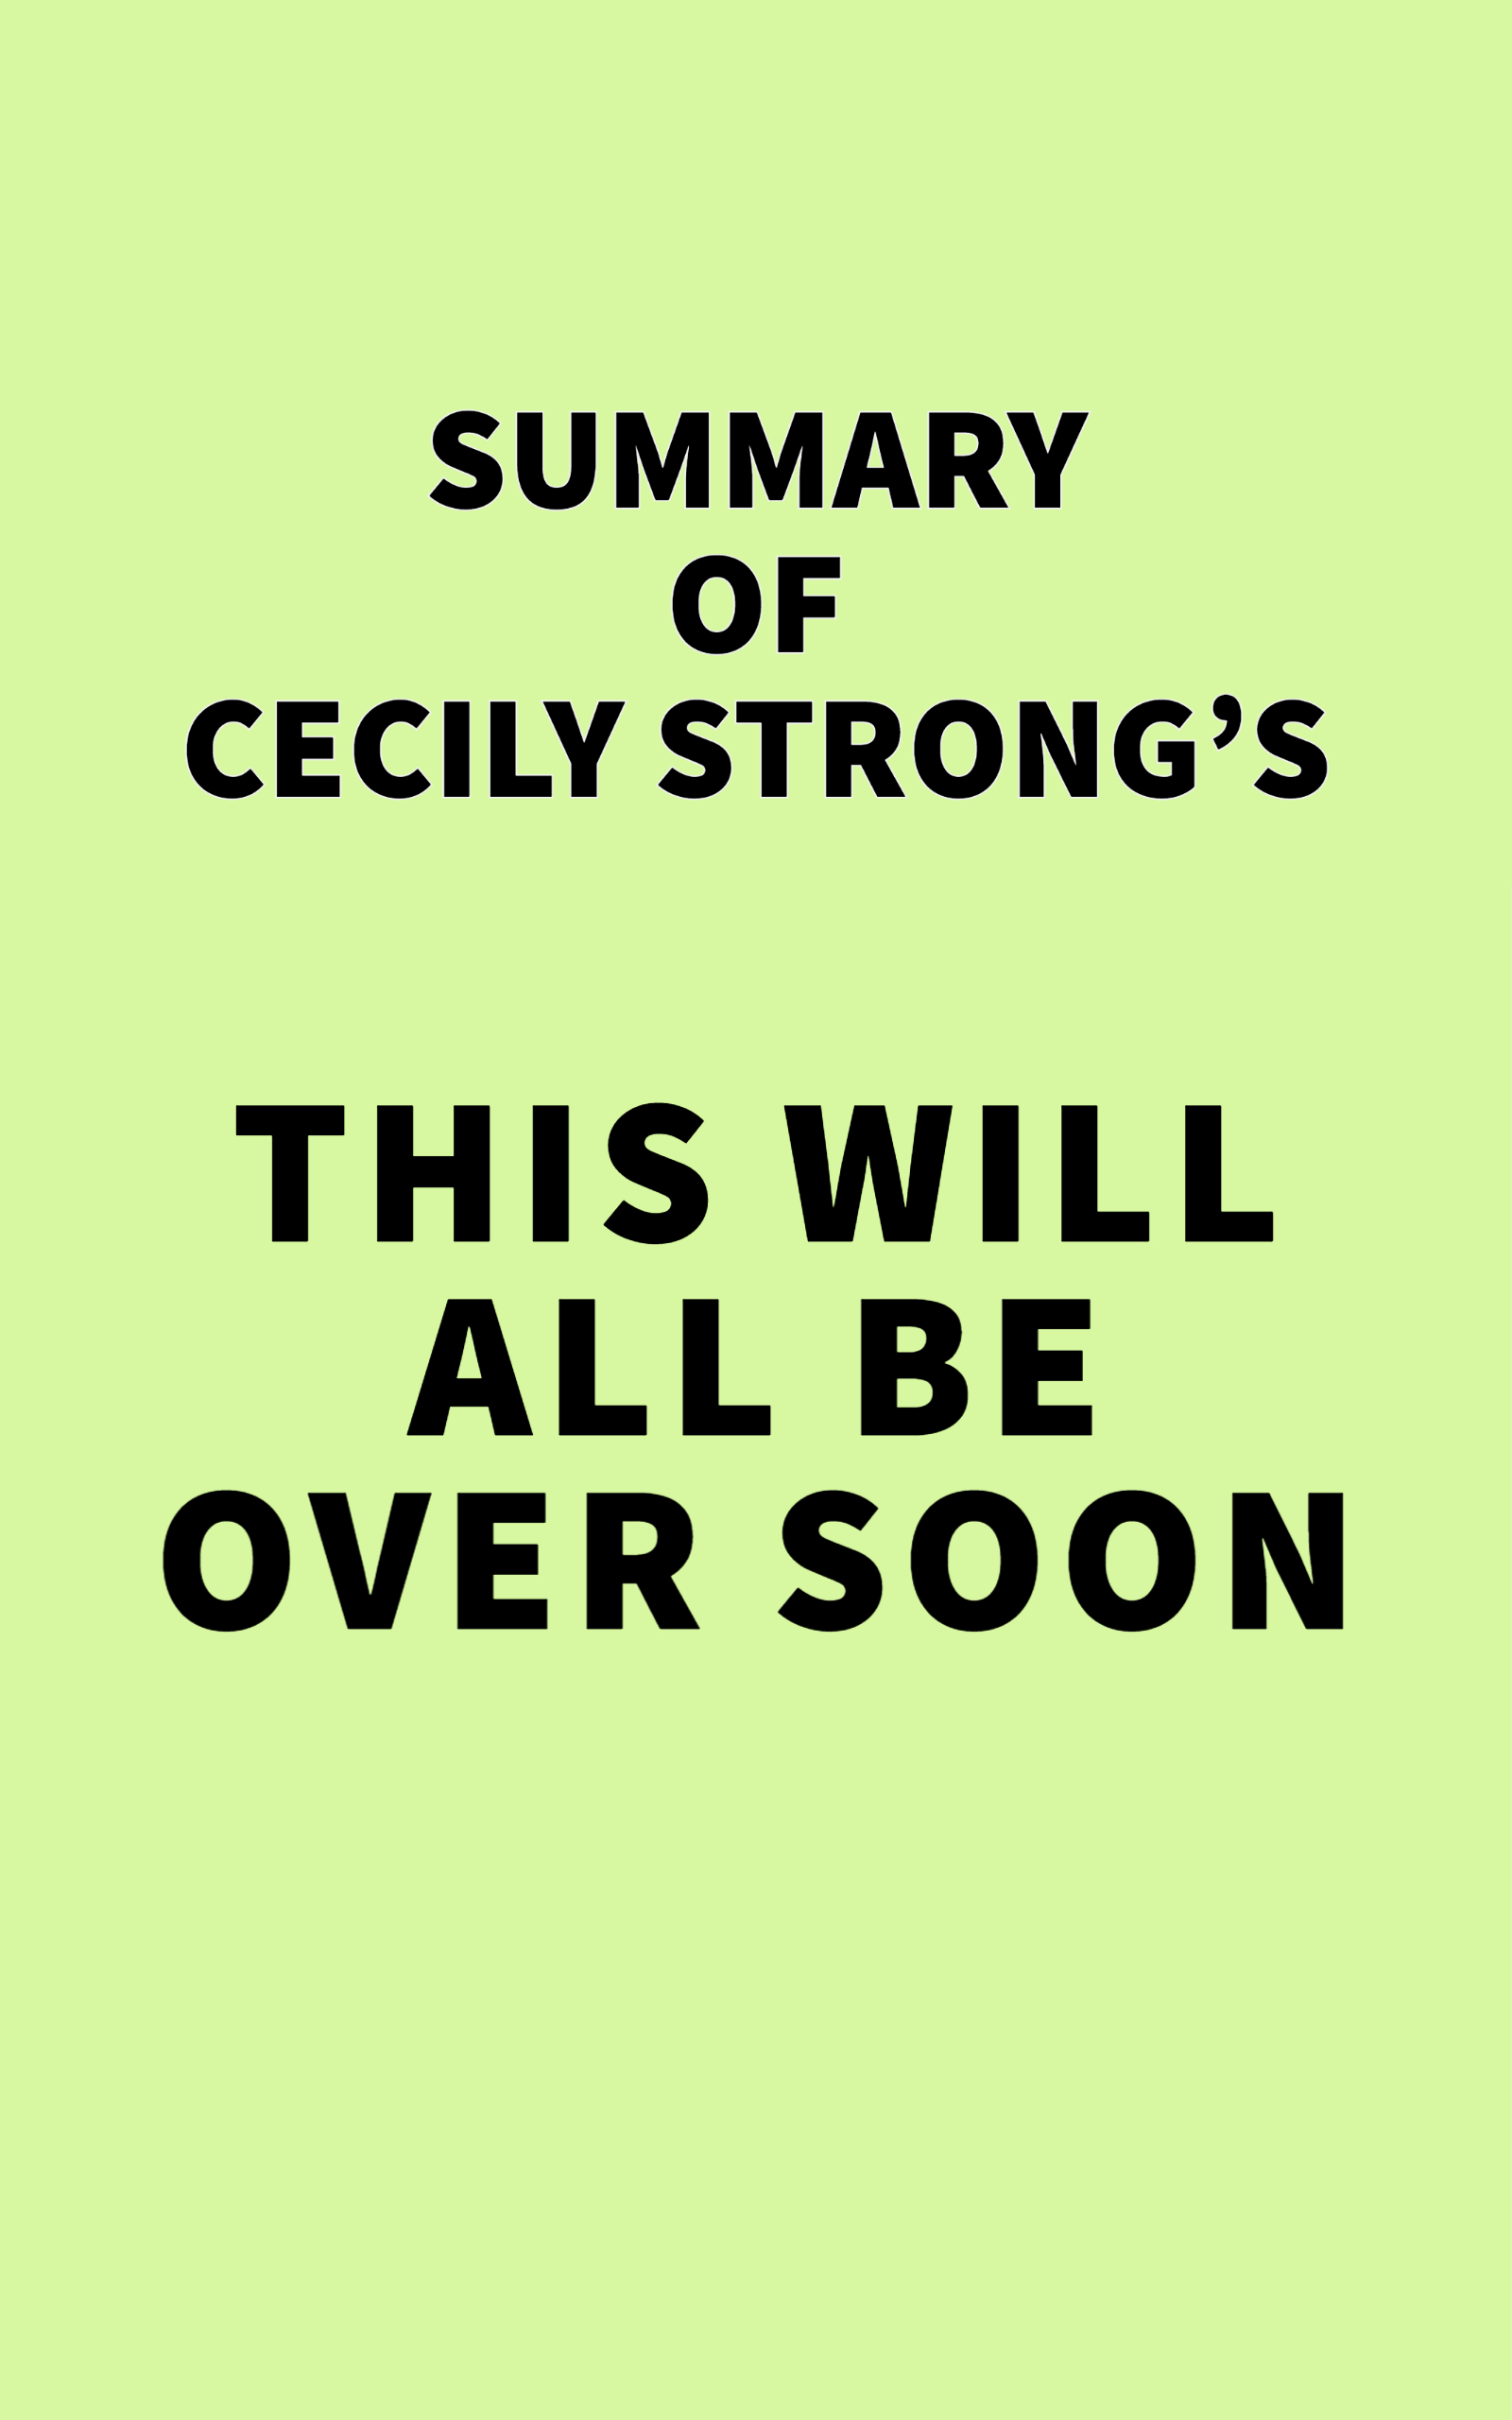 Summary of Cecily Strong's This Will All Be Over Soon